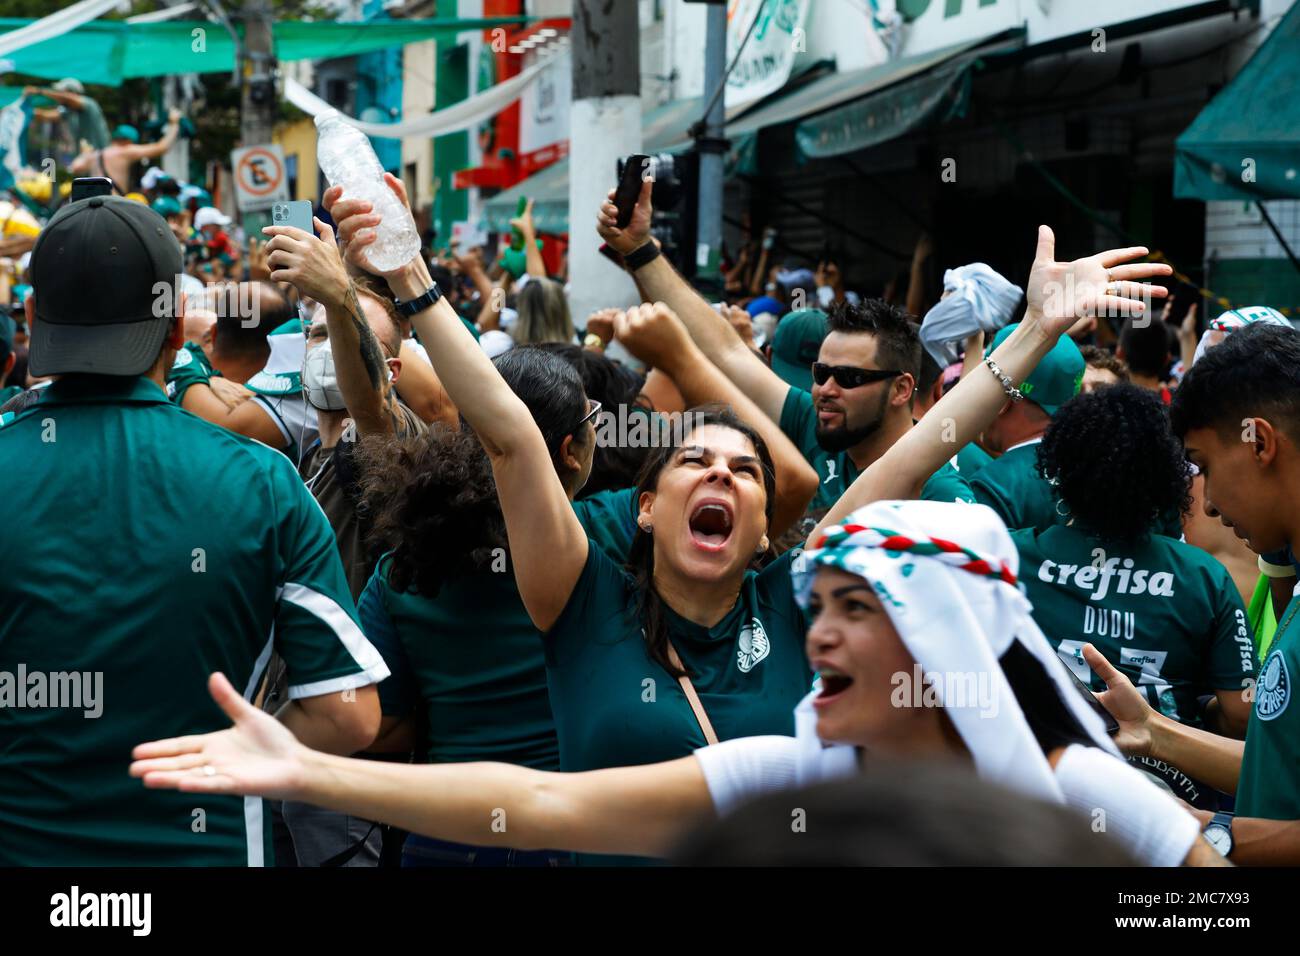 Palmeiras soccer club fans celebrate their teams goal as they watch a live broadcast from Abu Dhabi of the FIFA Club World Cup final soccer match against Chelsea, in Sao Paulo, Brazil,